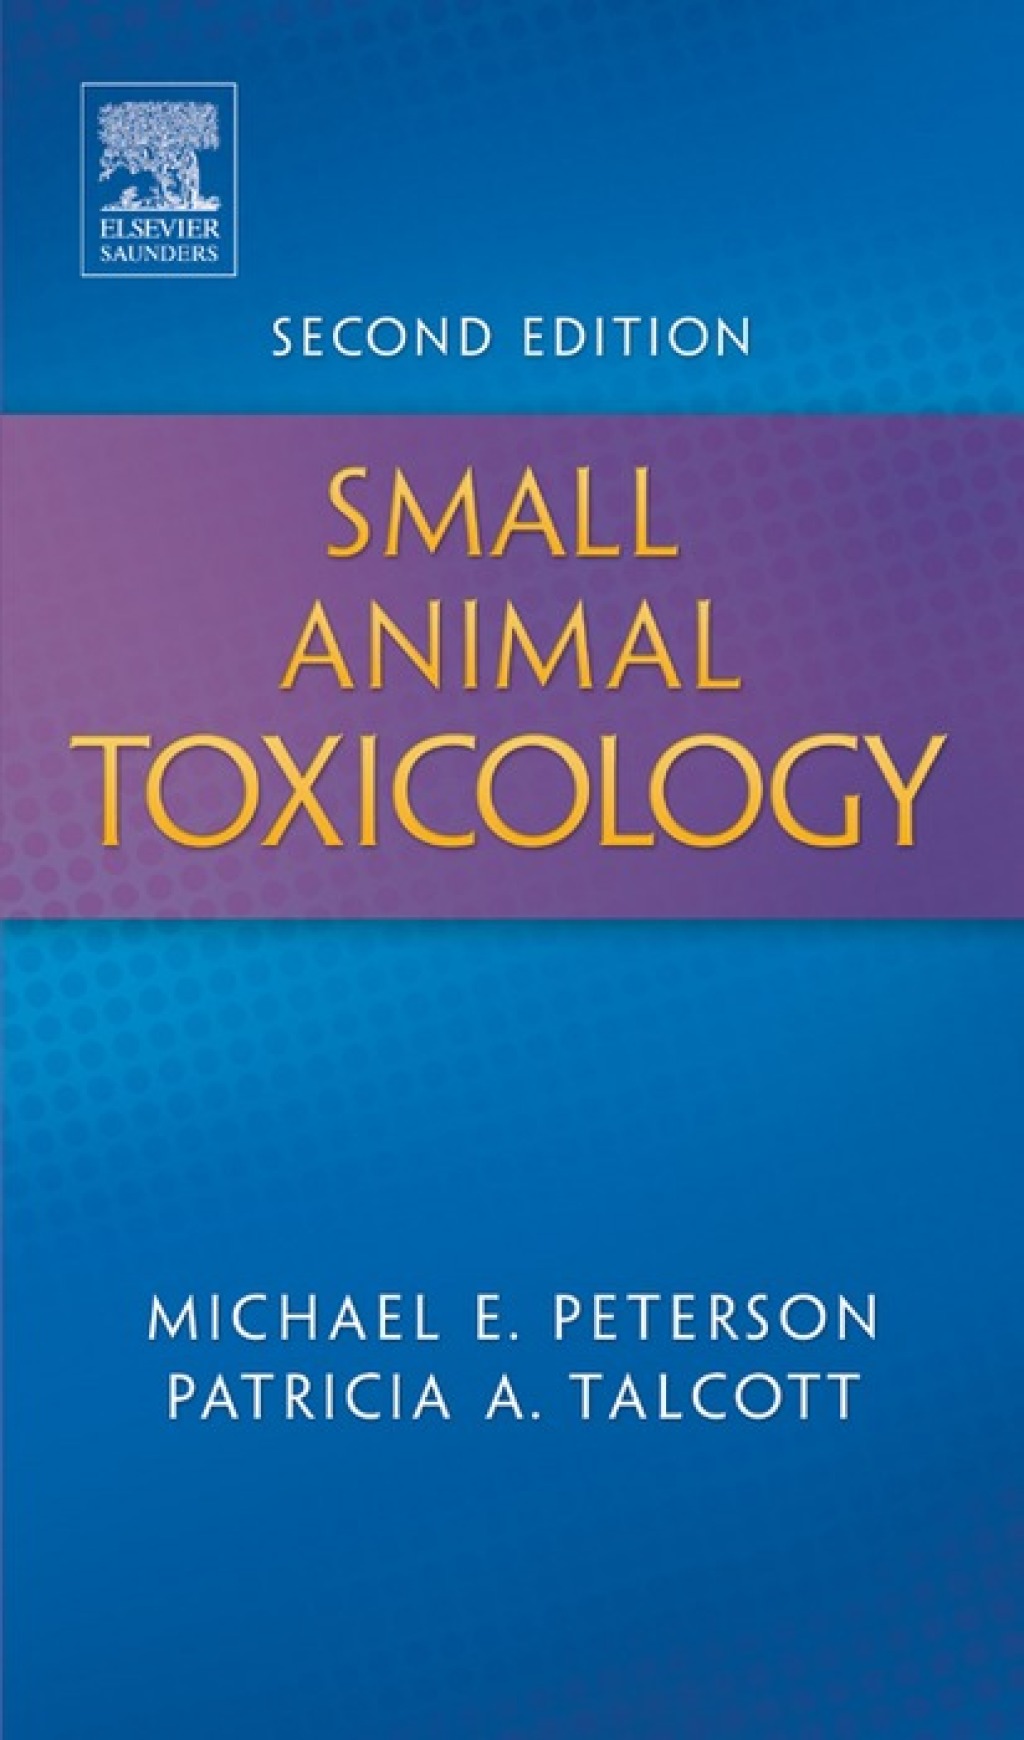 Small Animal Toxicology - 2nd Edition (eBook Rental)